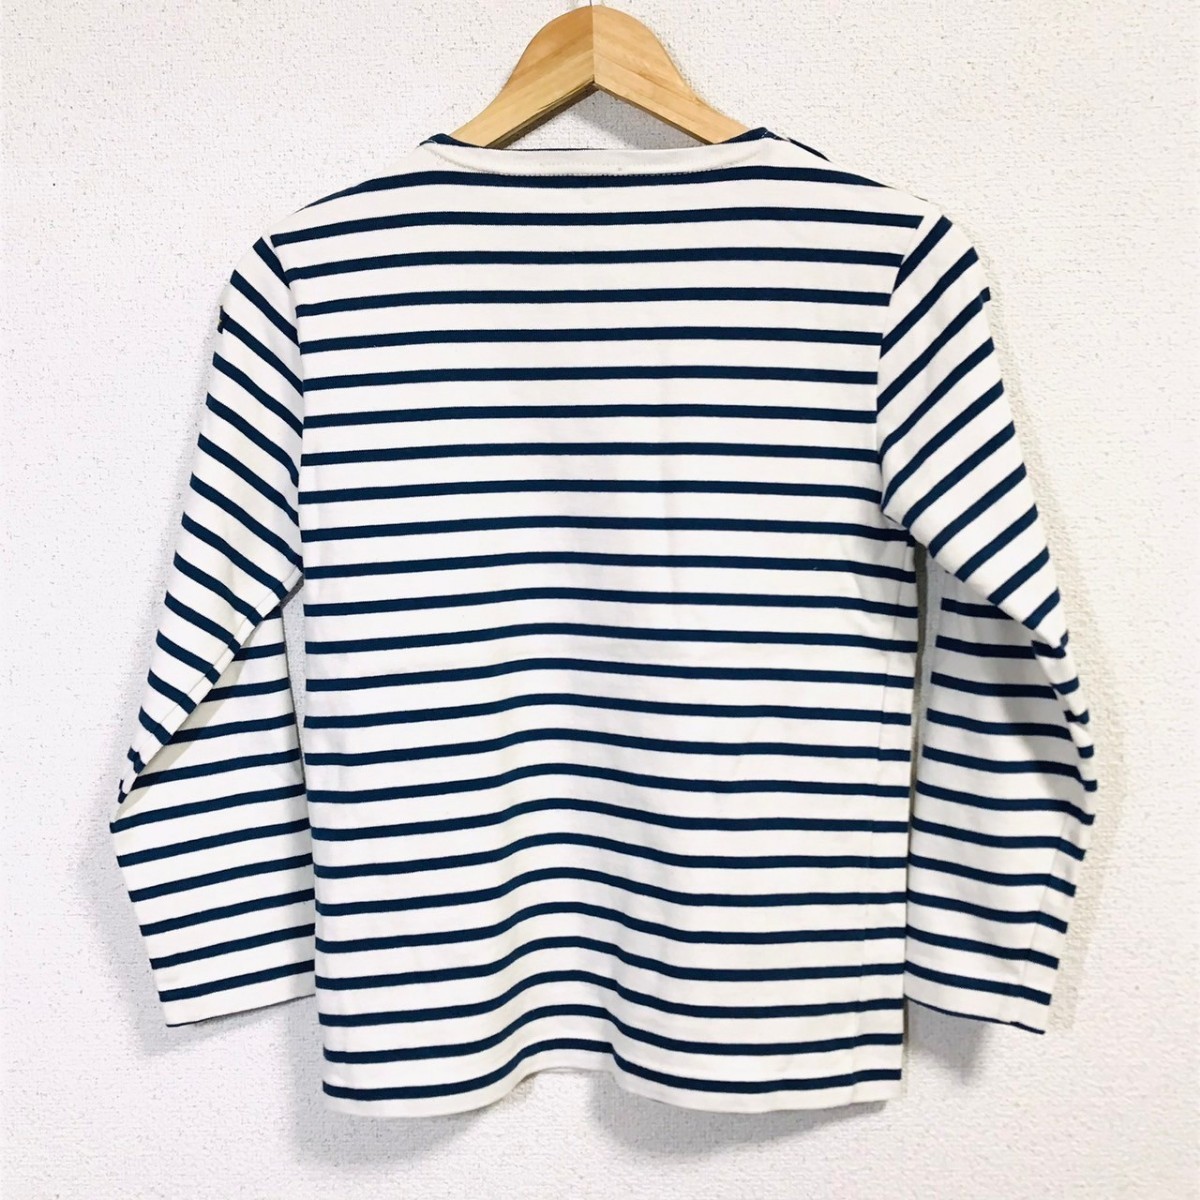 H6800dL France made Le Minor Le Minor size 0 (S rank ) bus k shirt long sleeve T shirt long T border pattern cut and sewn white × navy cotton 100%